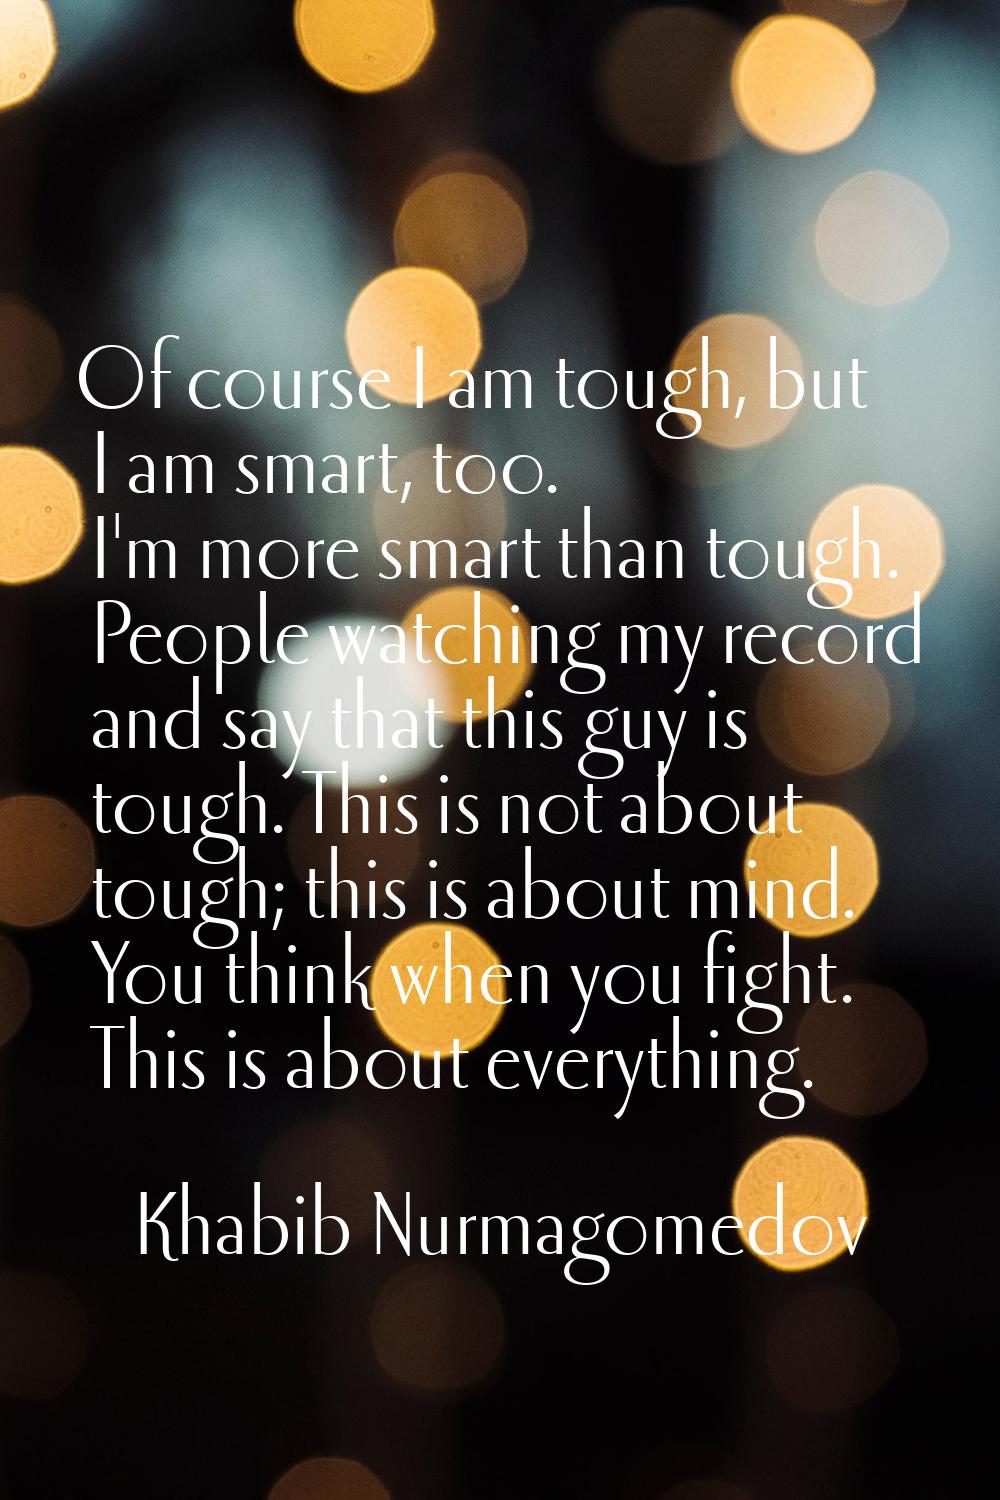 Of course I am tough, but I am smart, too. I'm more smart than tough. People watching my record and